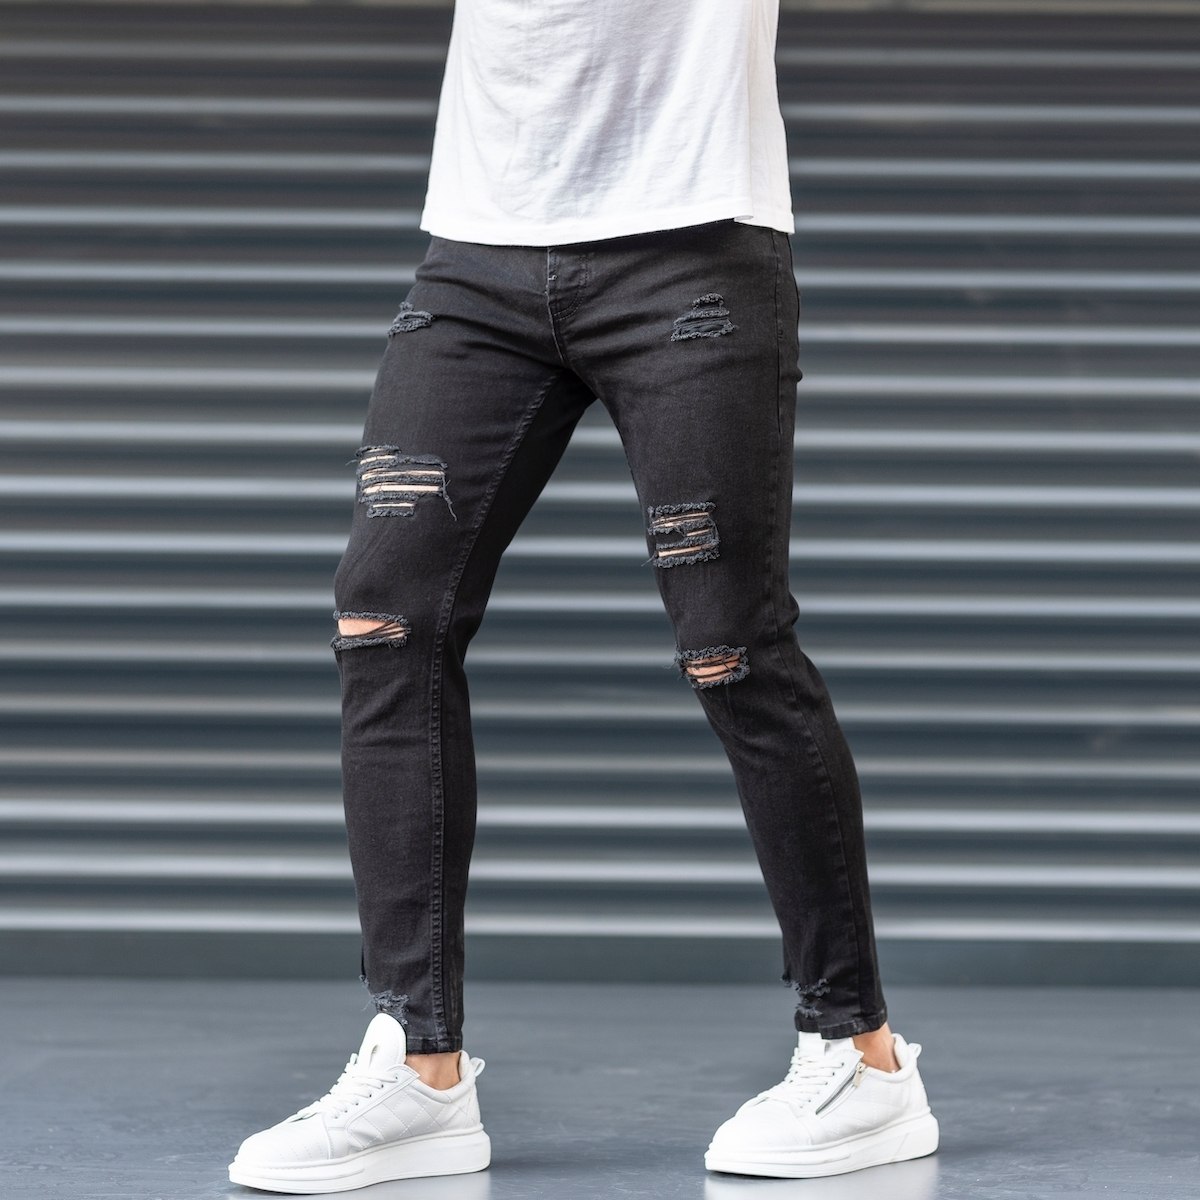 Men's Black Claw-Ripped Jeans